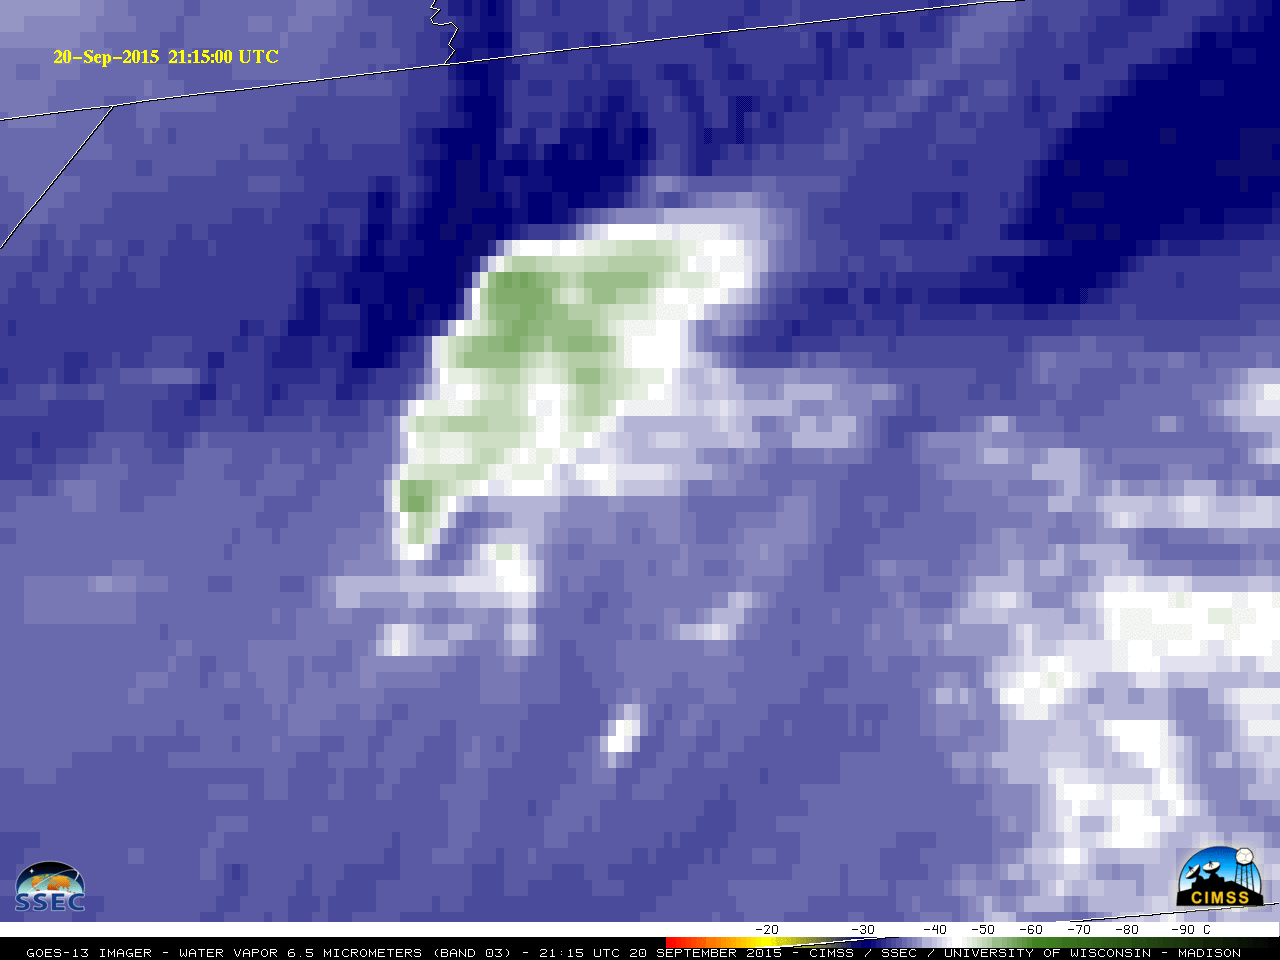 GOES-13 water vapor (6.5 um) images [click to play animation]